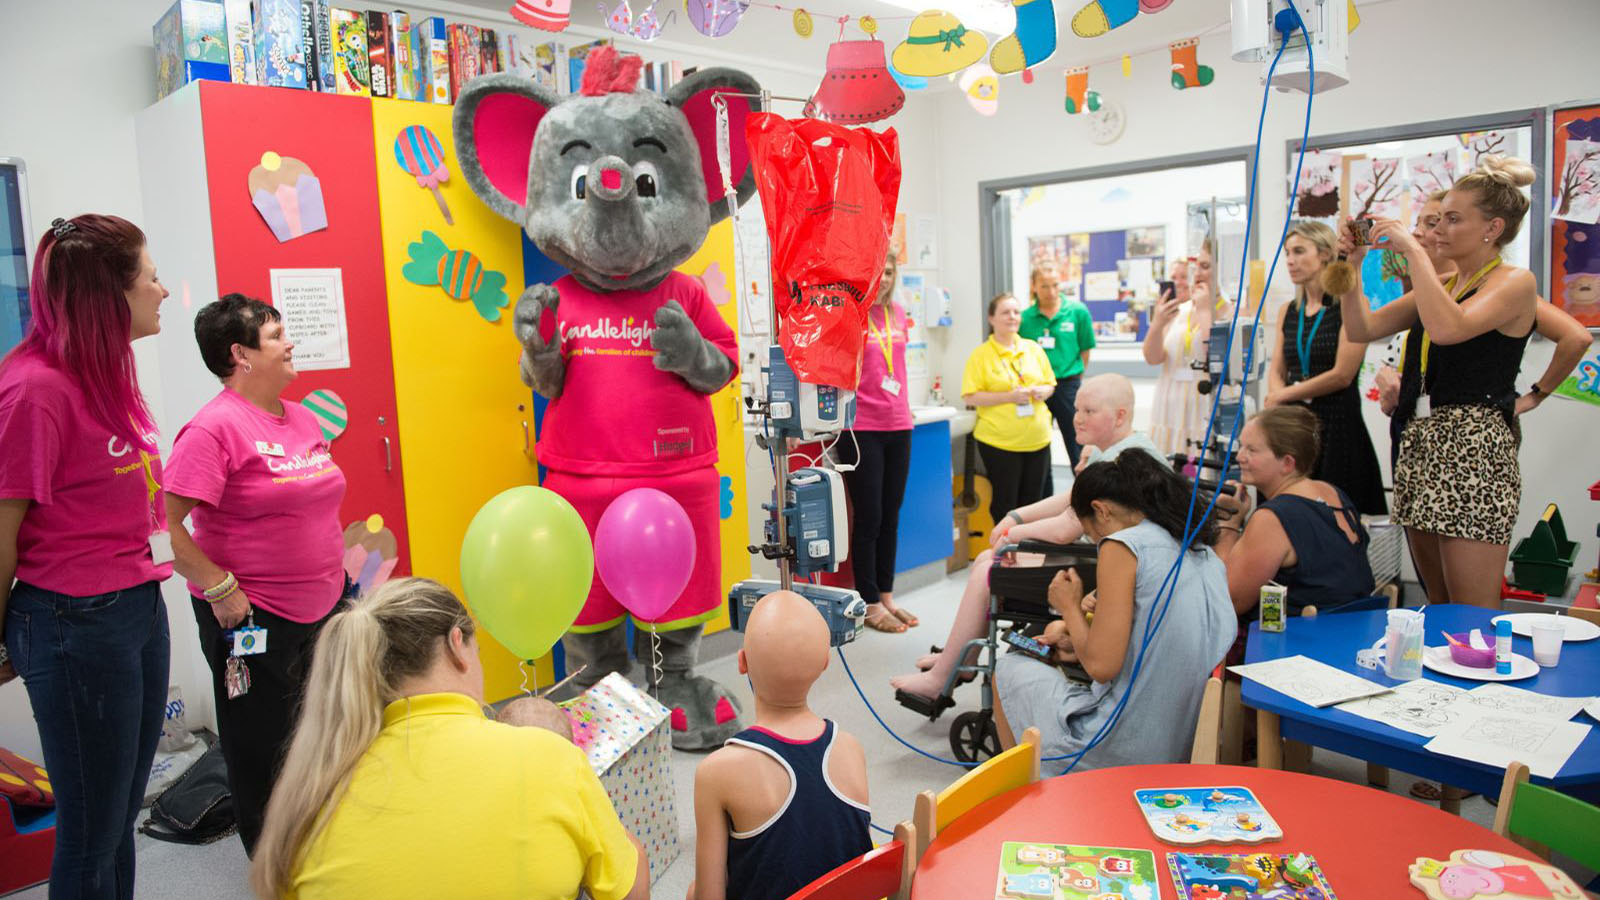 : An eventful day for the young patients at Leeds General Infirmary’s children’s oncology ward.